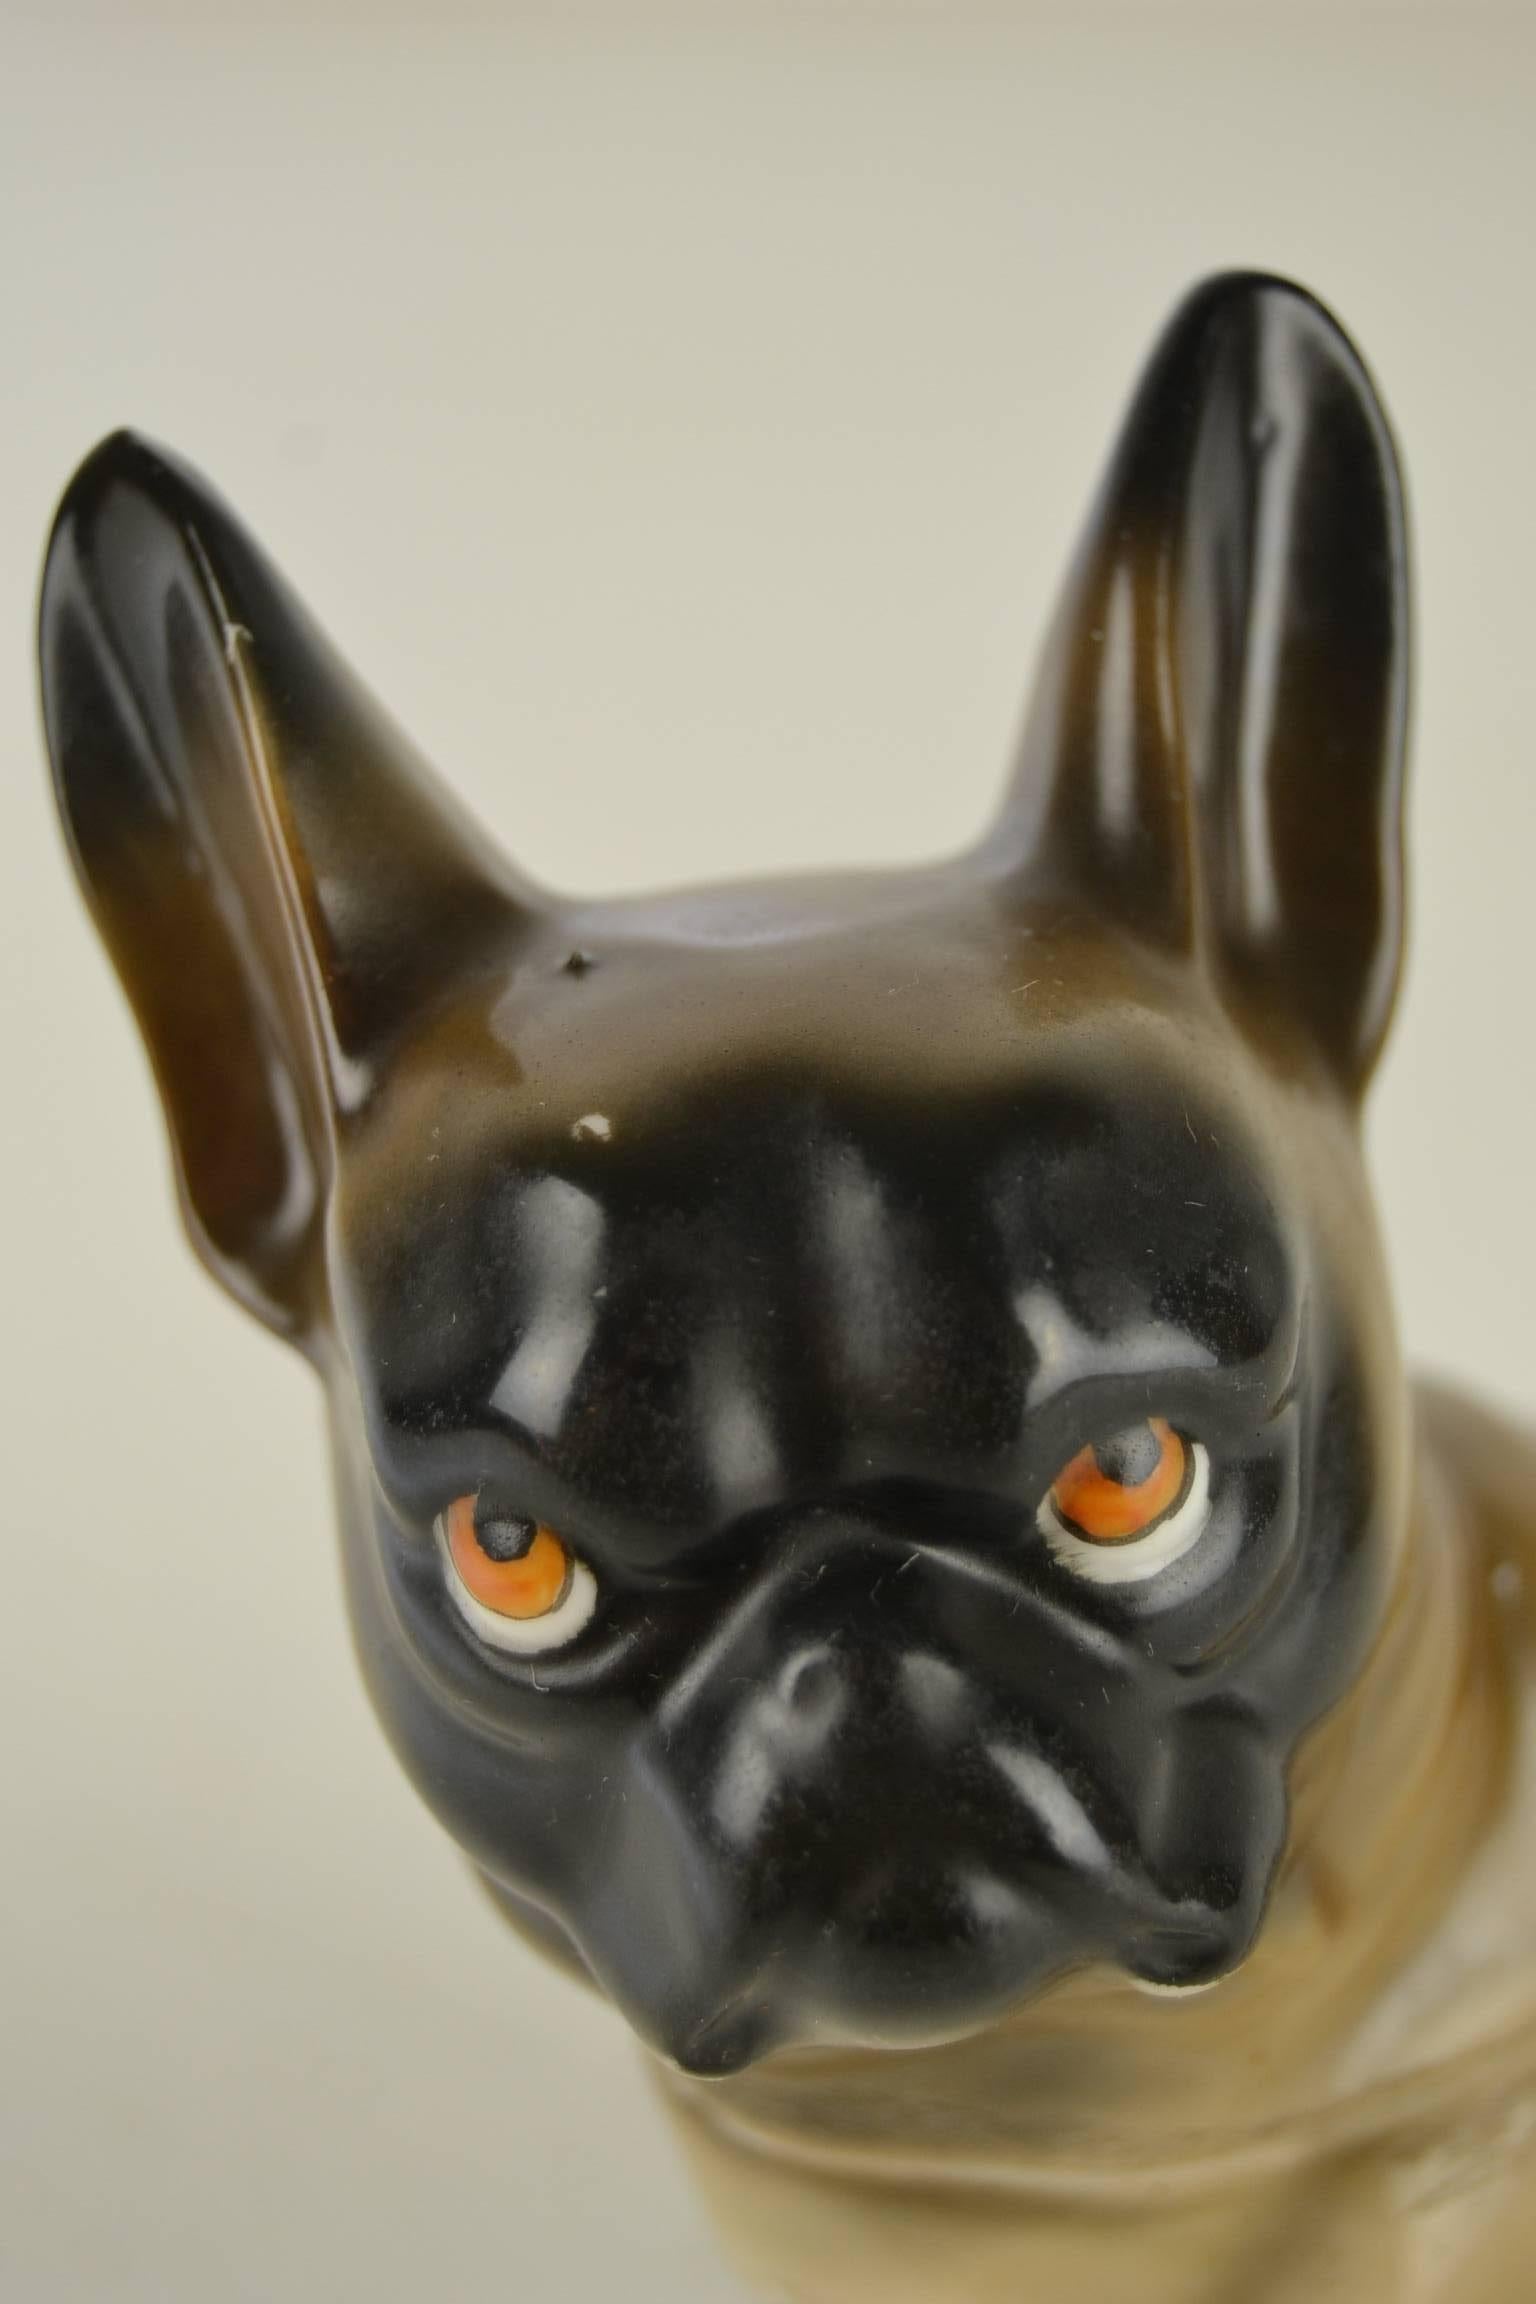 Art Deco Black Masked French Bulldog Humidor for loose tobacco. 
This German Porcelain french bulldog sculpture dates from the 1930s. 
Bulldog Figurine with black mask and grumpy tri-colored eyes.

You can take the head off to storage tobacco or can